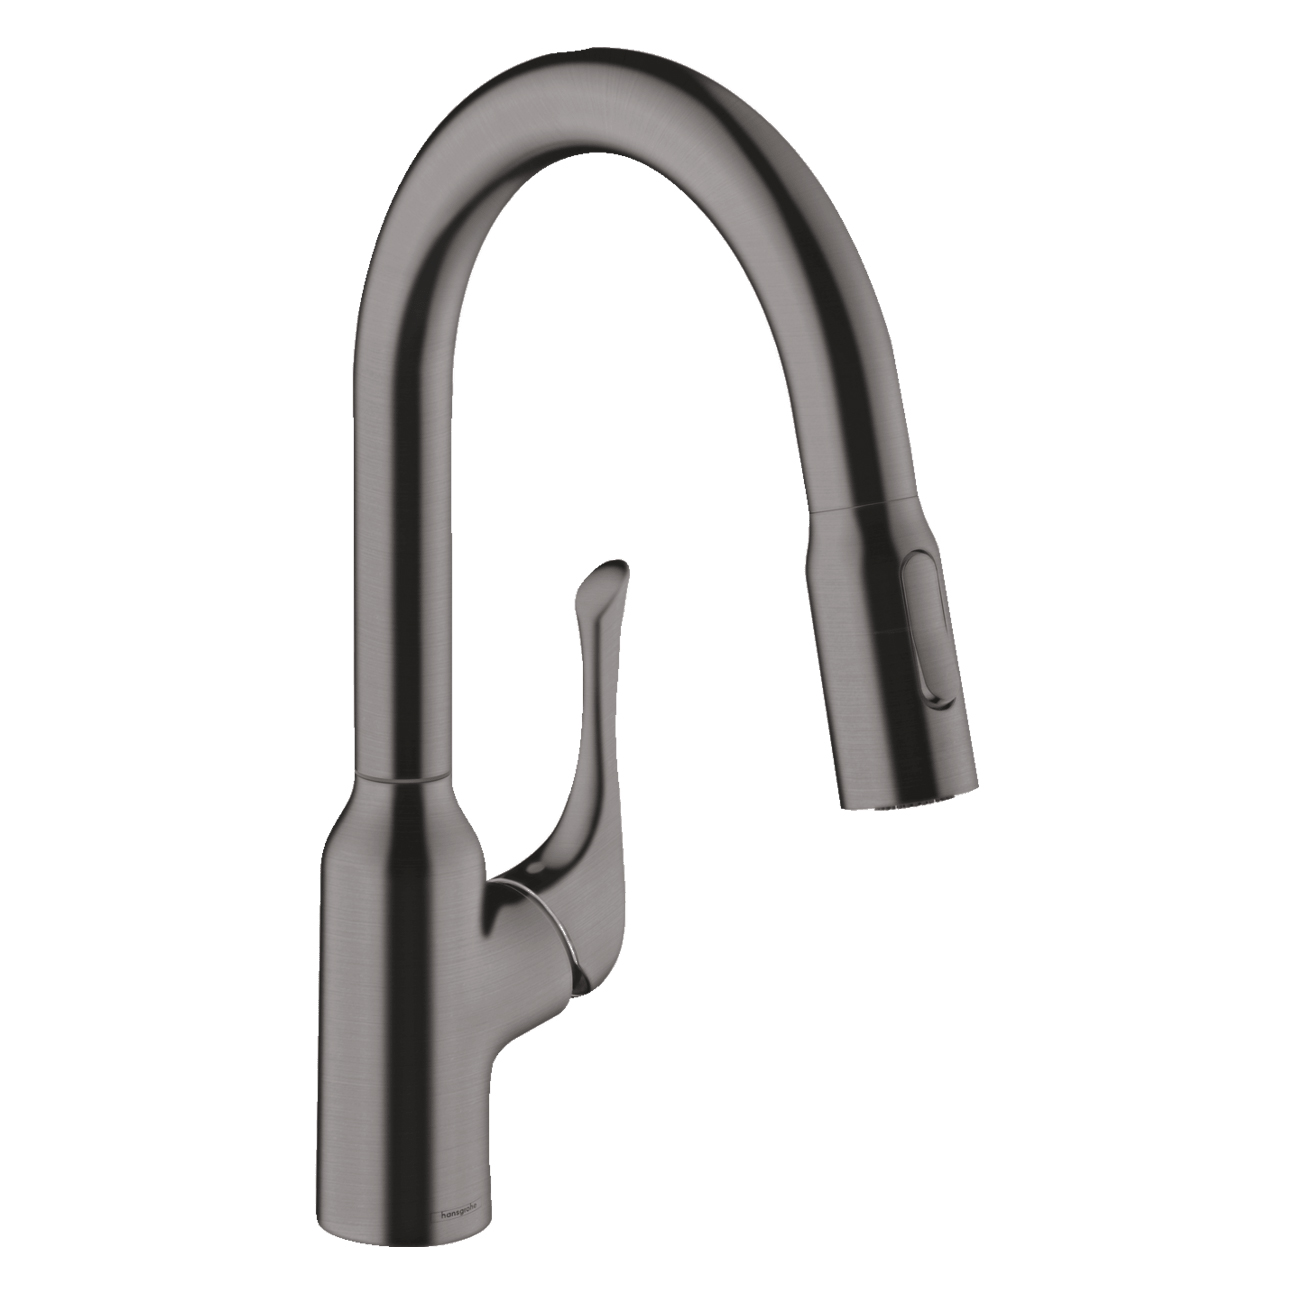 Allegro N Pull-Down Prep Kitchen Faucet in Brushed Black Chrome, 1.75 gpm